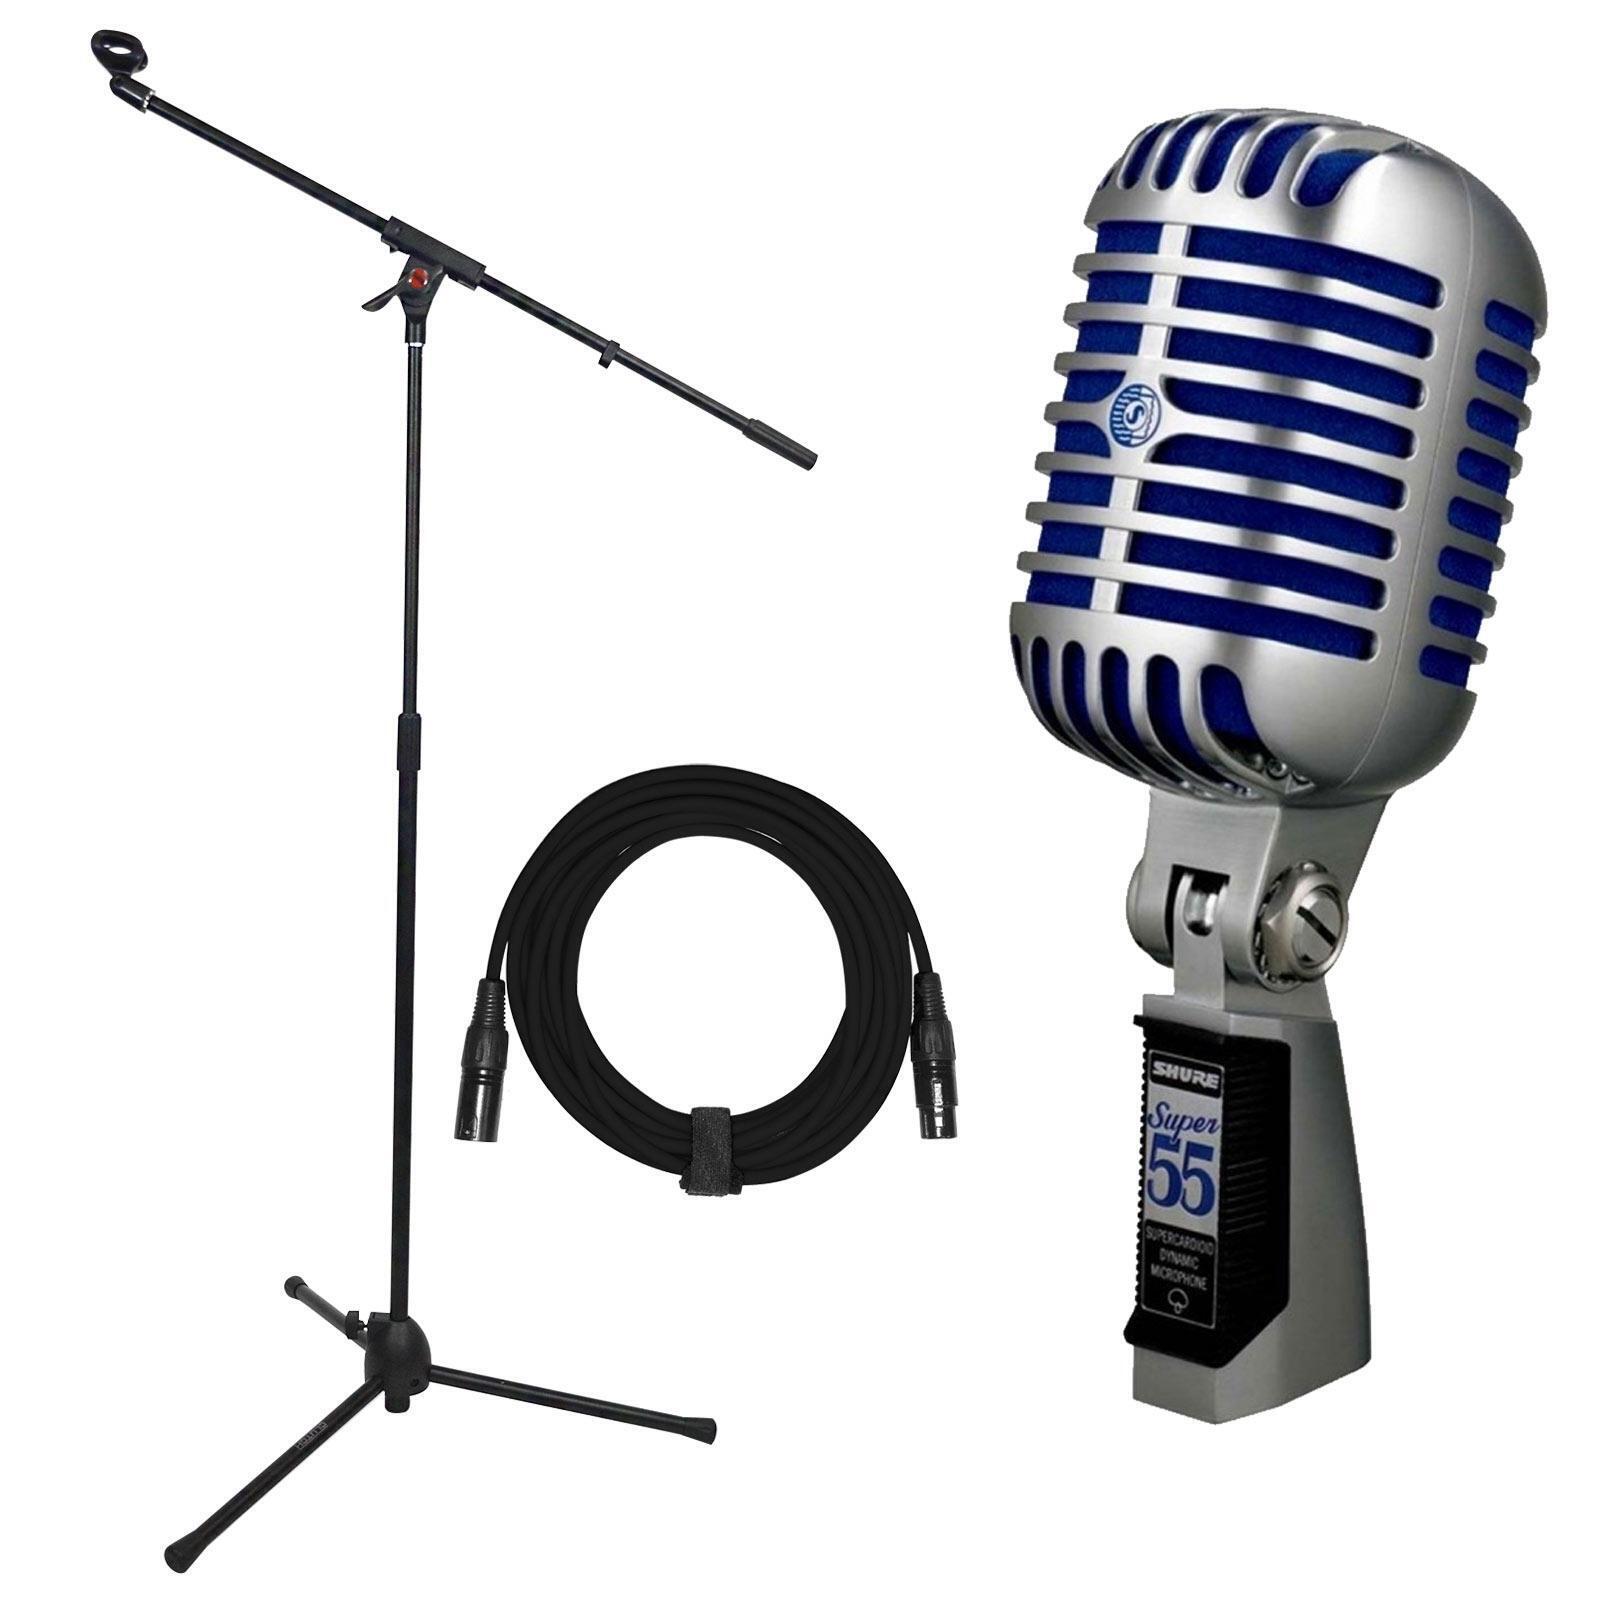 Shure Super 55 Deluxe Vocal Microphone with Adjustable Boom Stand